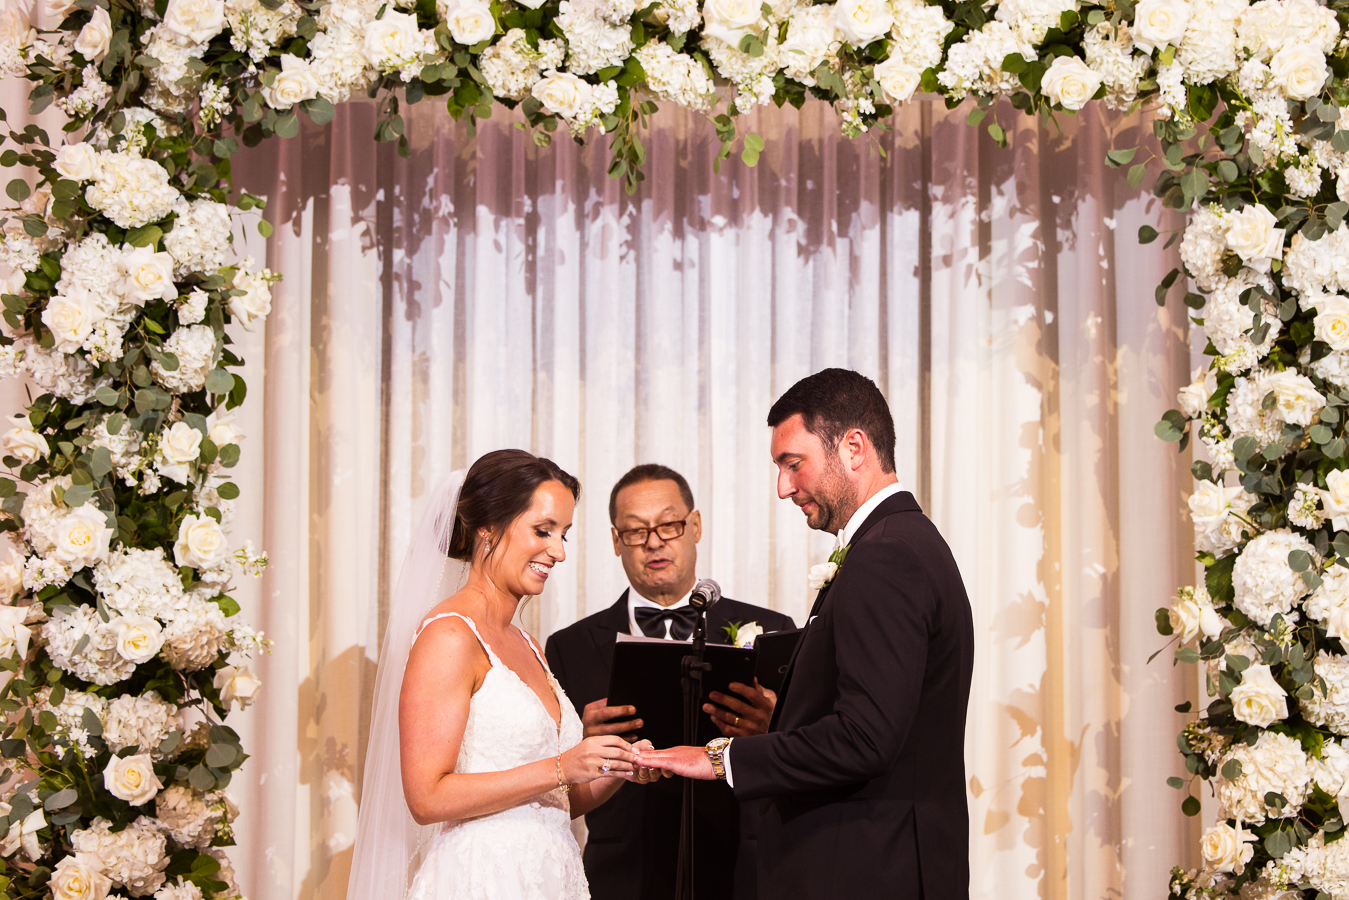 the palace wedding photographer, lisa rhinehart, captures this image of the bride and groom as they exchange their vows and rings with a giant white floral arch in the background behind them during this indoor palace wedding ceremony in NJ 